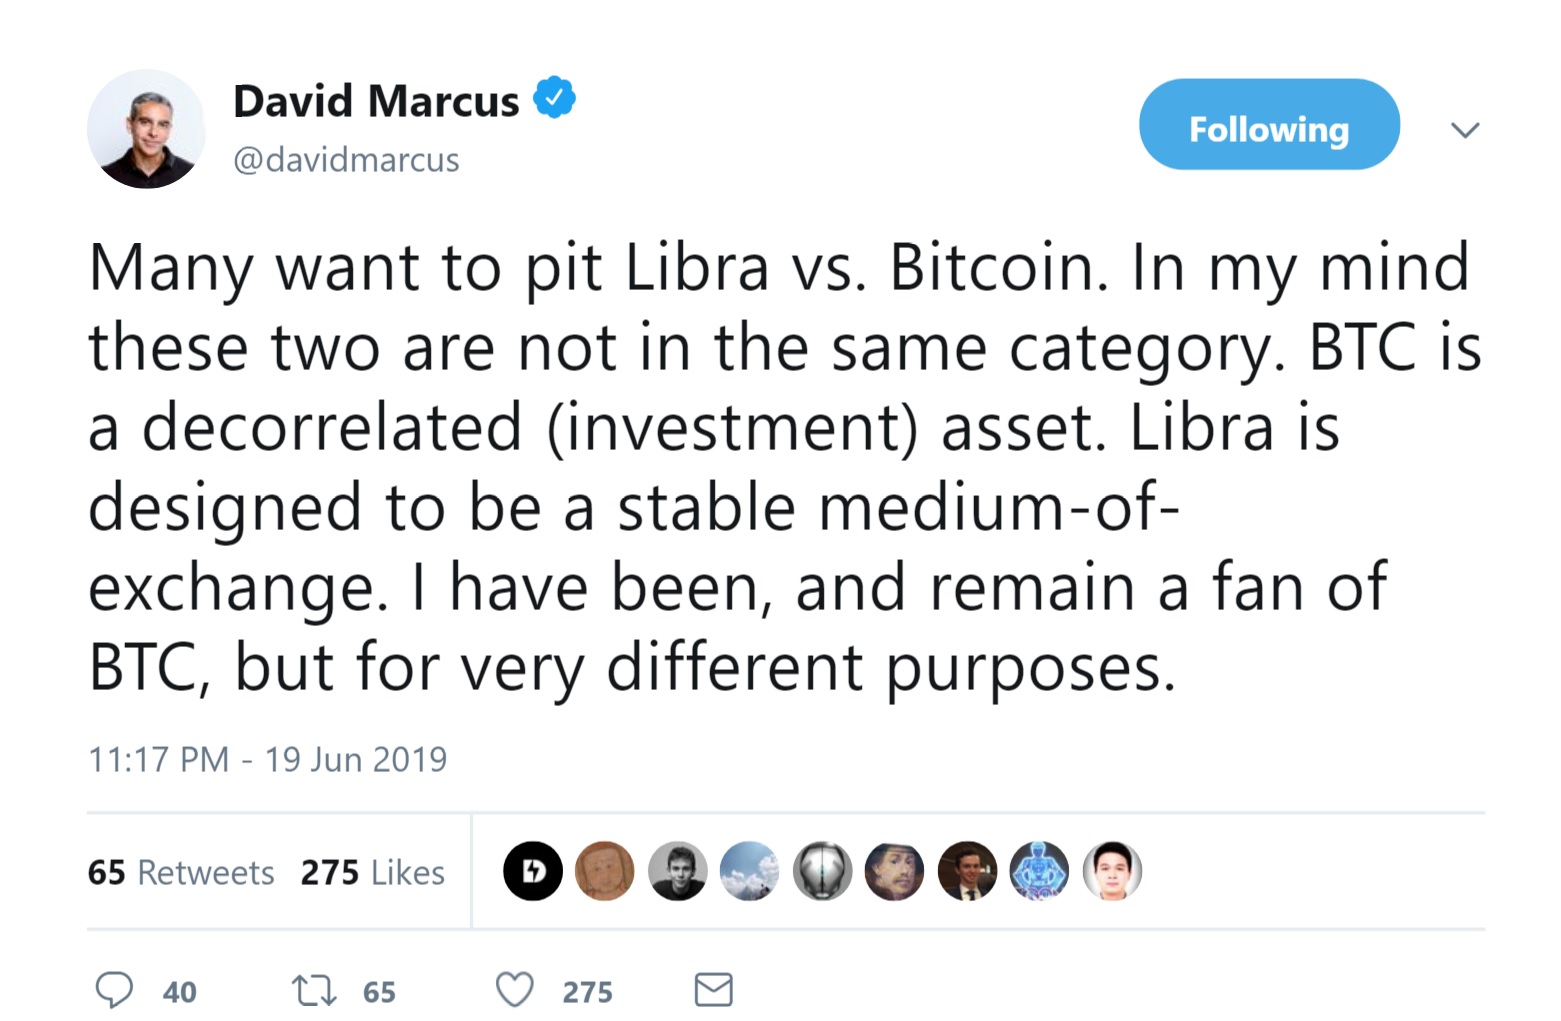 David Marcus on the most obvious comparison between Libra and Bitcoin